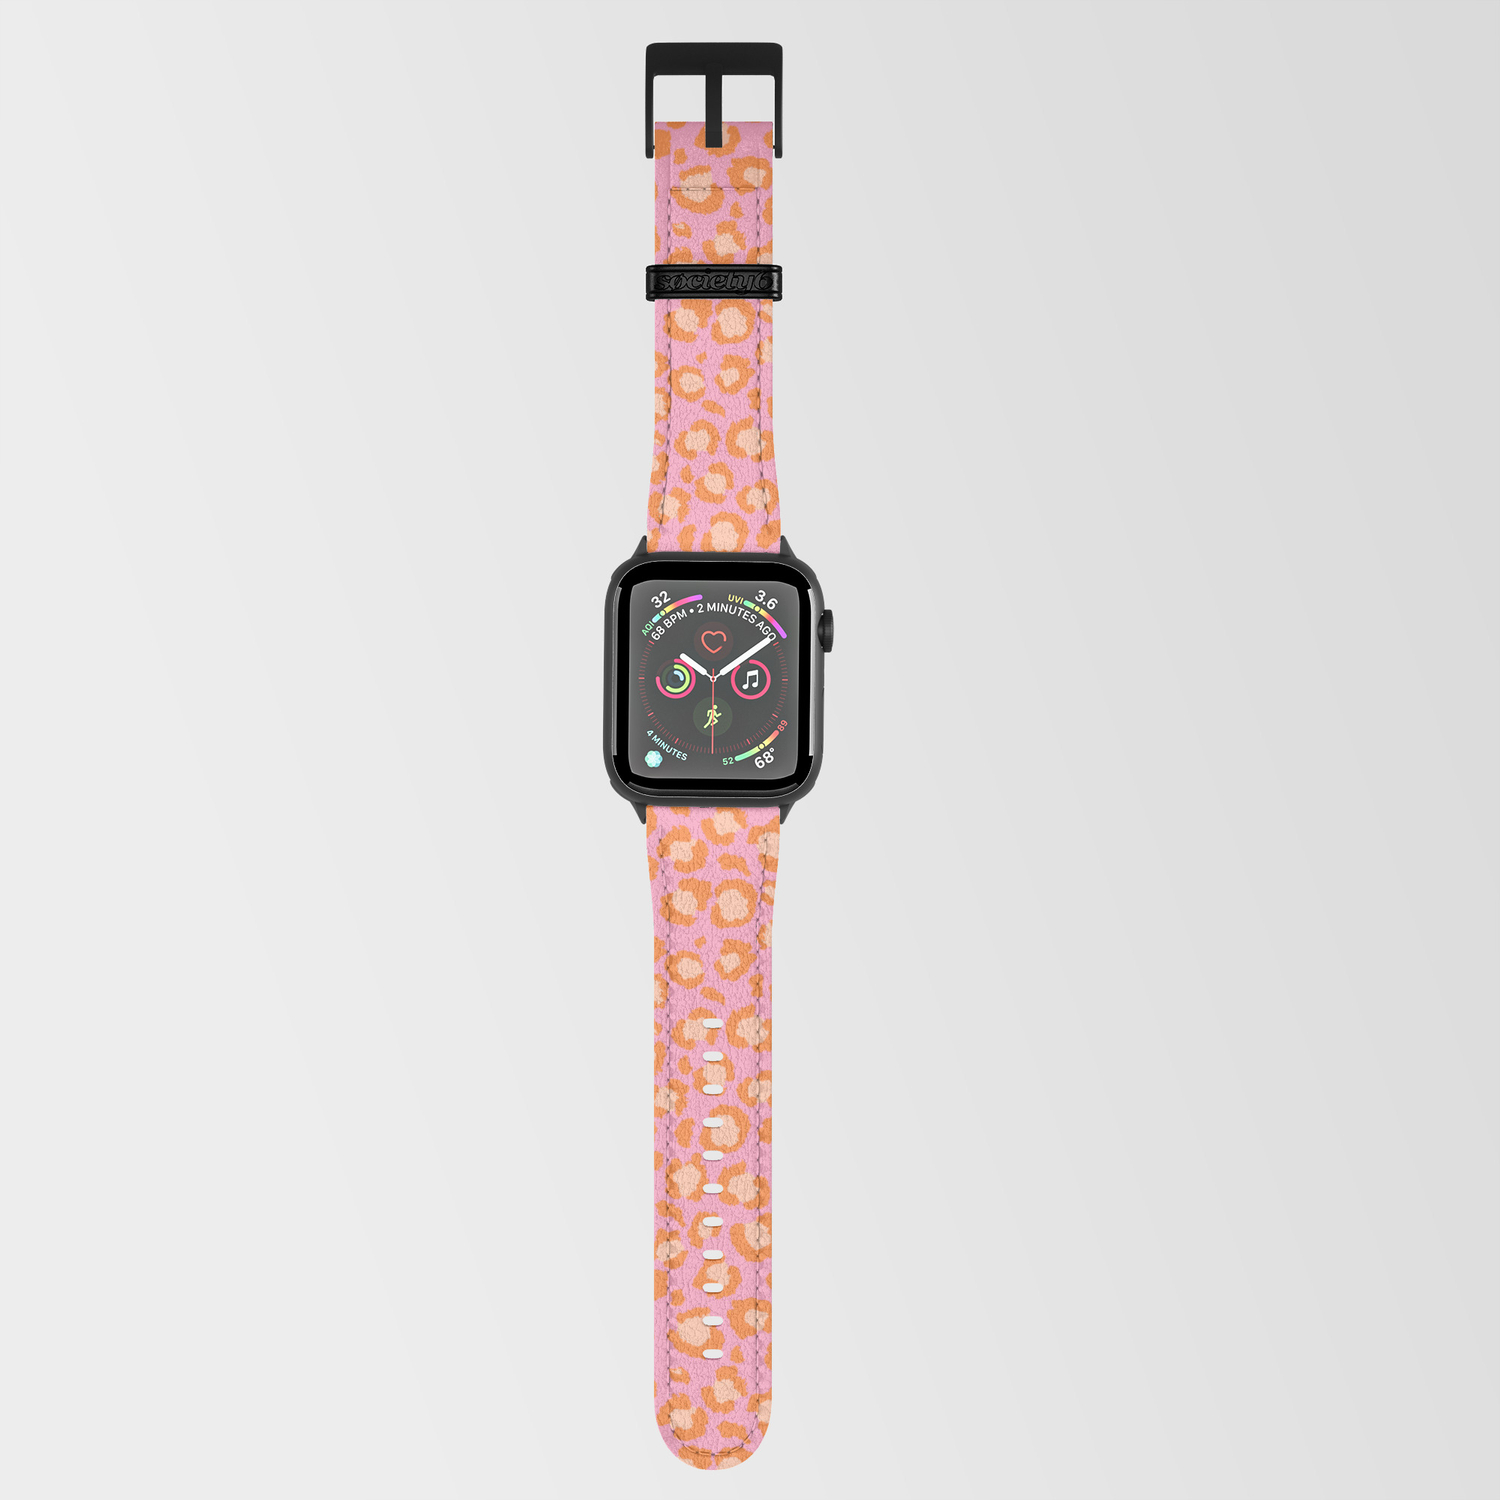 Bright Pink and Orange Leopard Print Animal Print Cheetah Print Apple Watch  Band by SquirrelCoffeeDesign | Society6